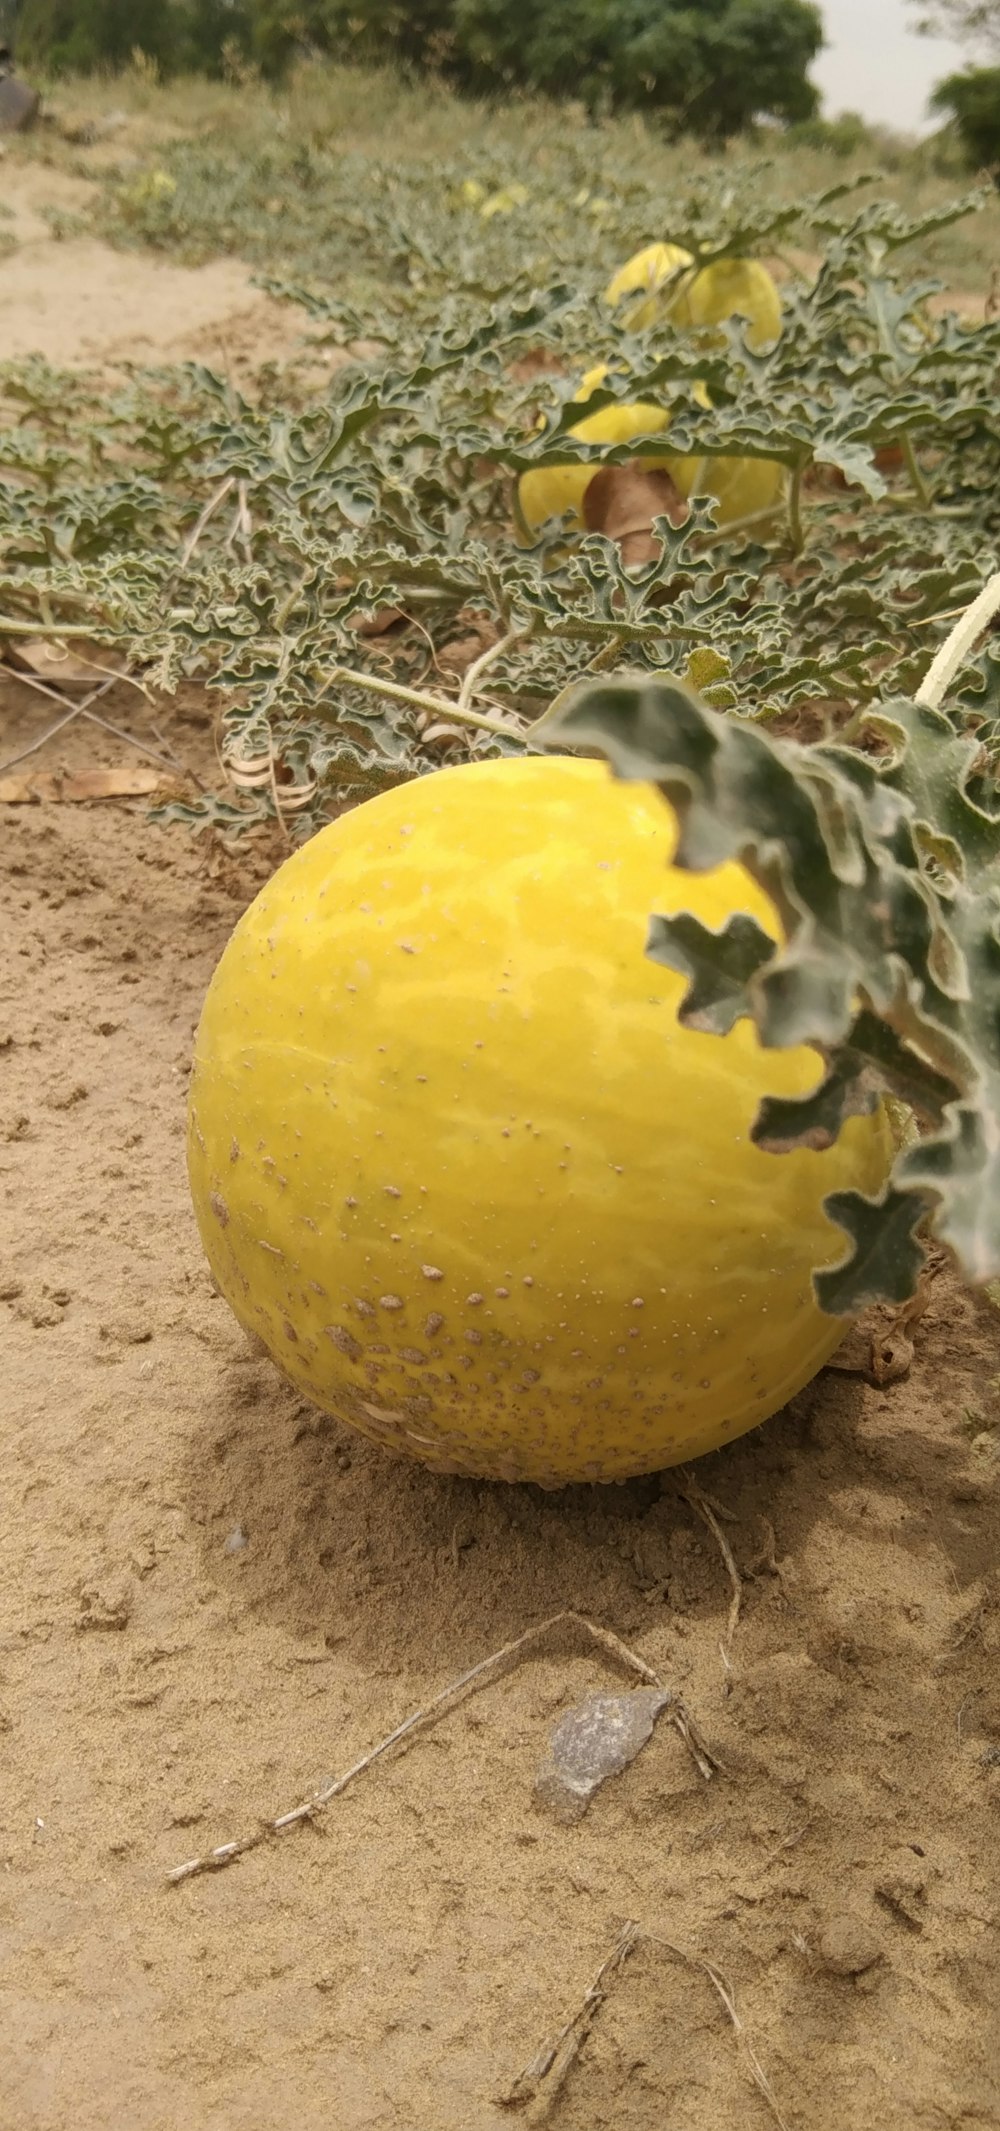 a yellow fruit on the ground